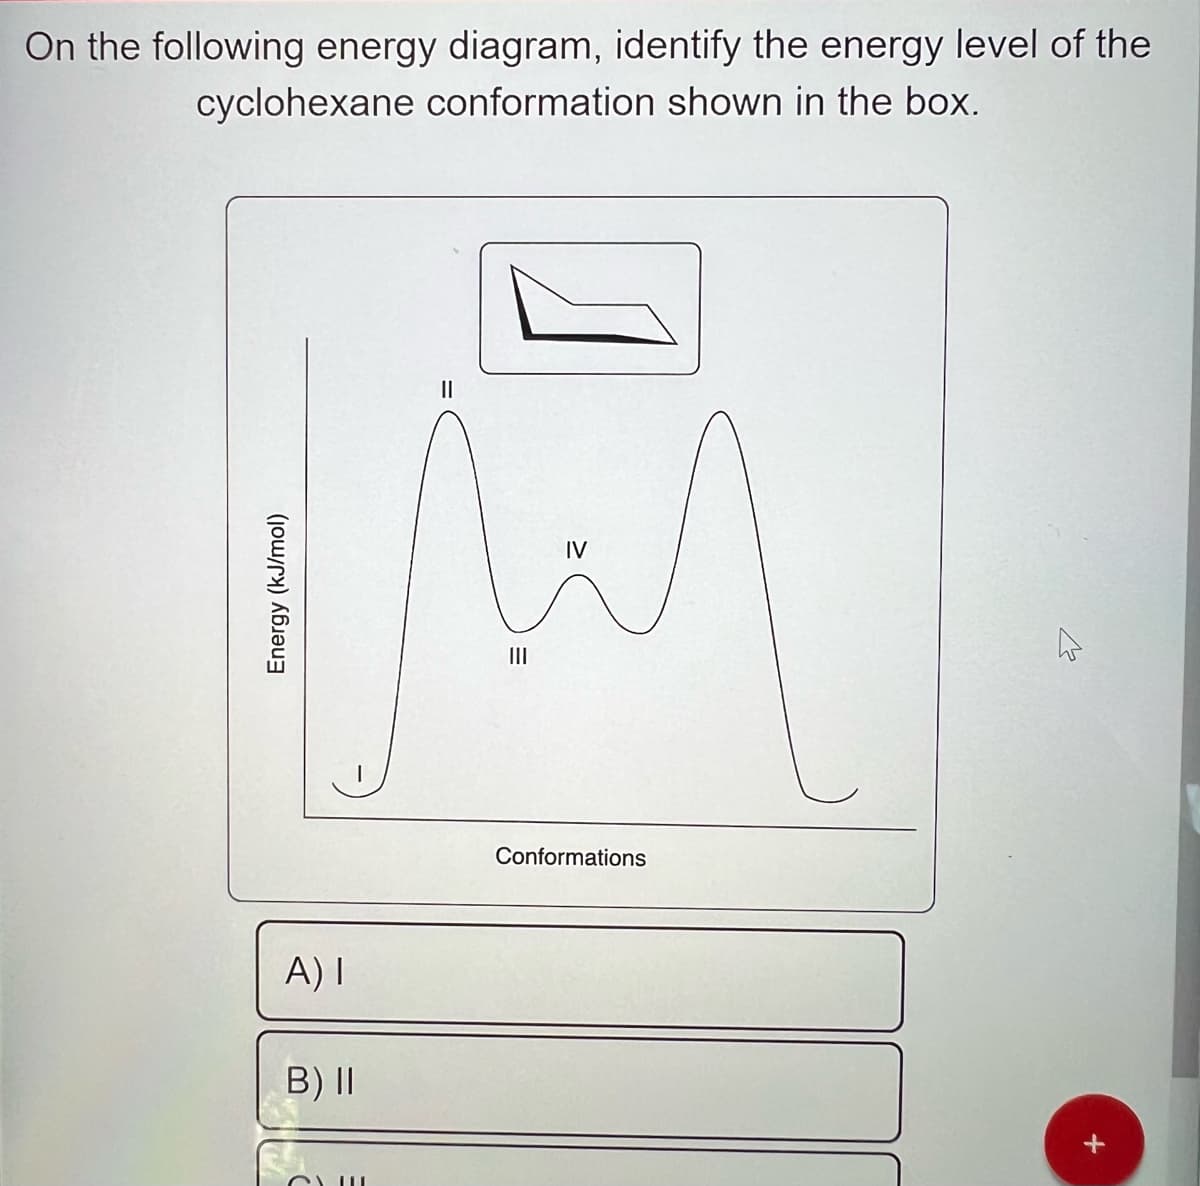 On the following energy diagram, identify the energy level of the
cyclohexane conformation shown in the box.
Energy (kJ/mol)
A) I
B) II
CLU
|||
IV
Conformations
2